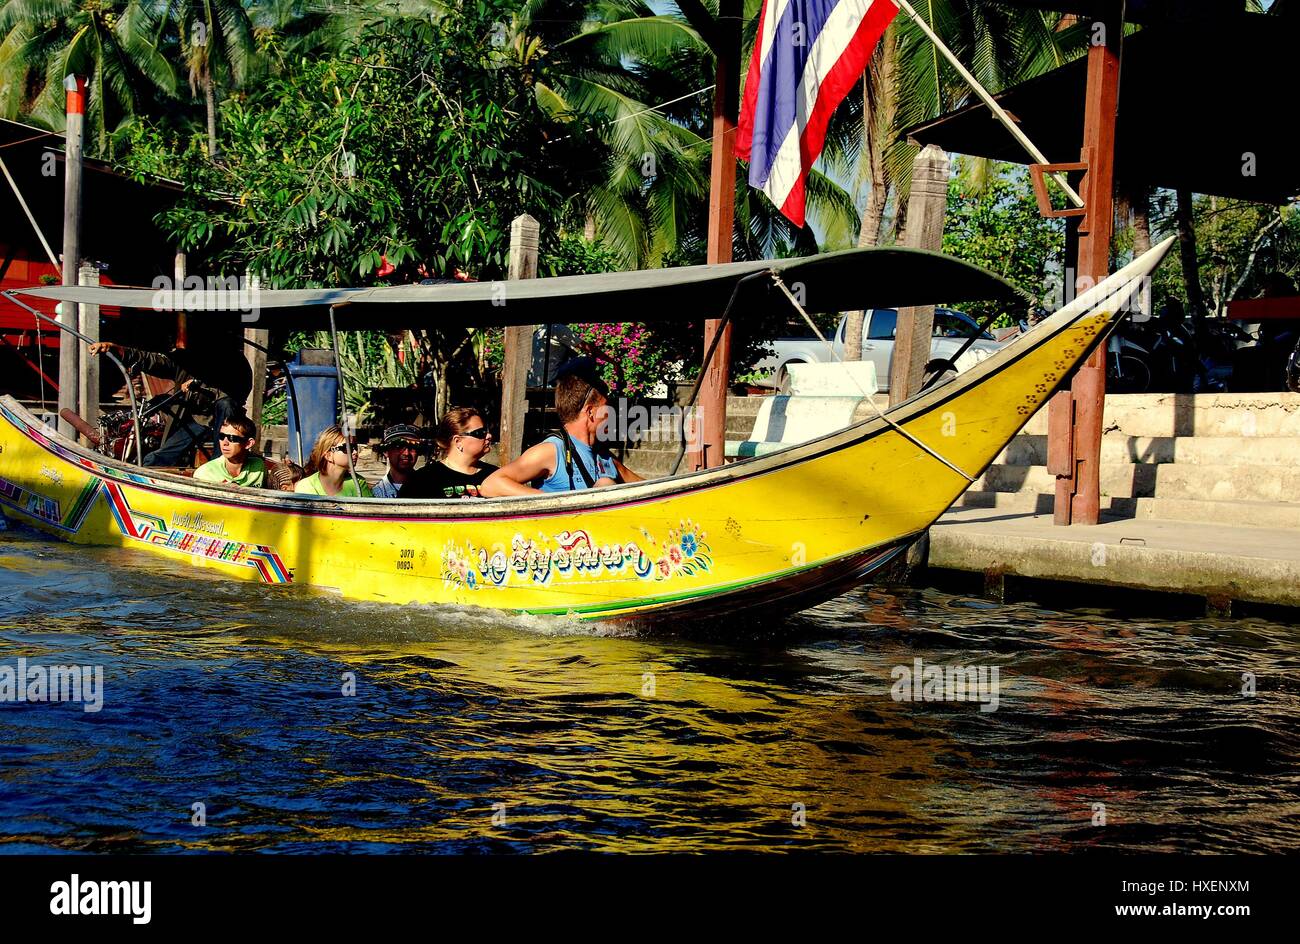 Damnoen Saduak, Thailand - January 9, 2010:   A covered long boat takes tourists for a ride through the canals of the famous Floating Market    * Stock Photo